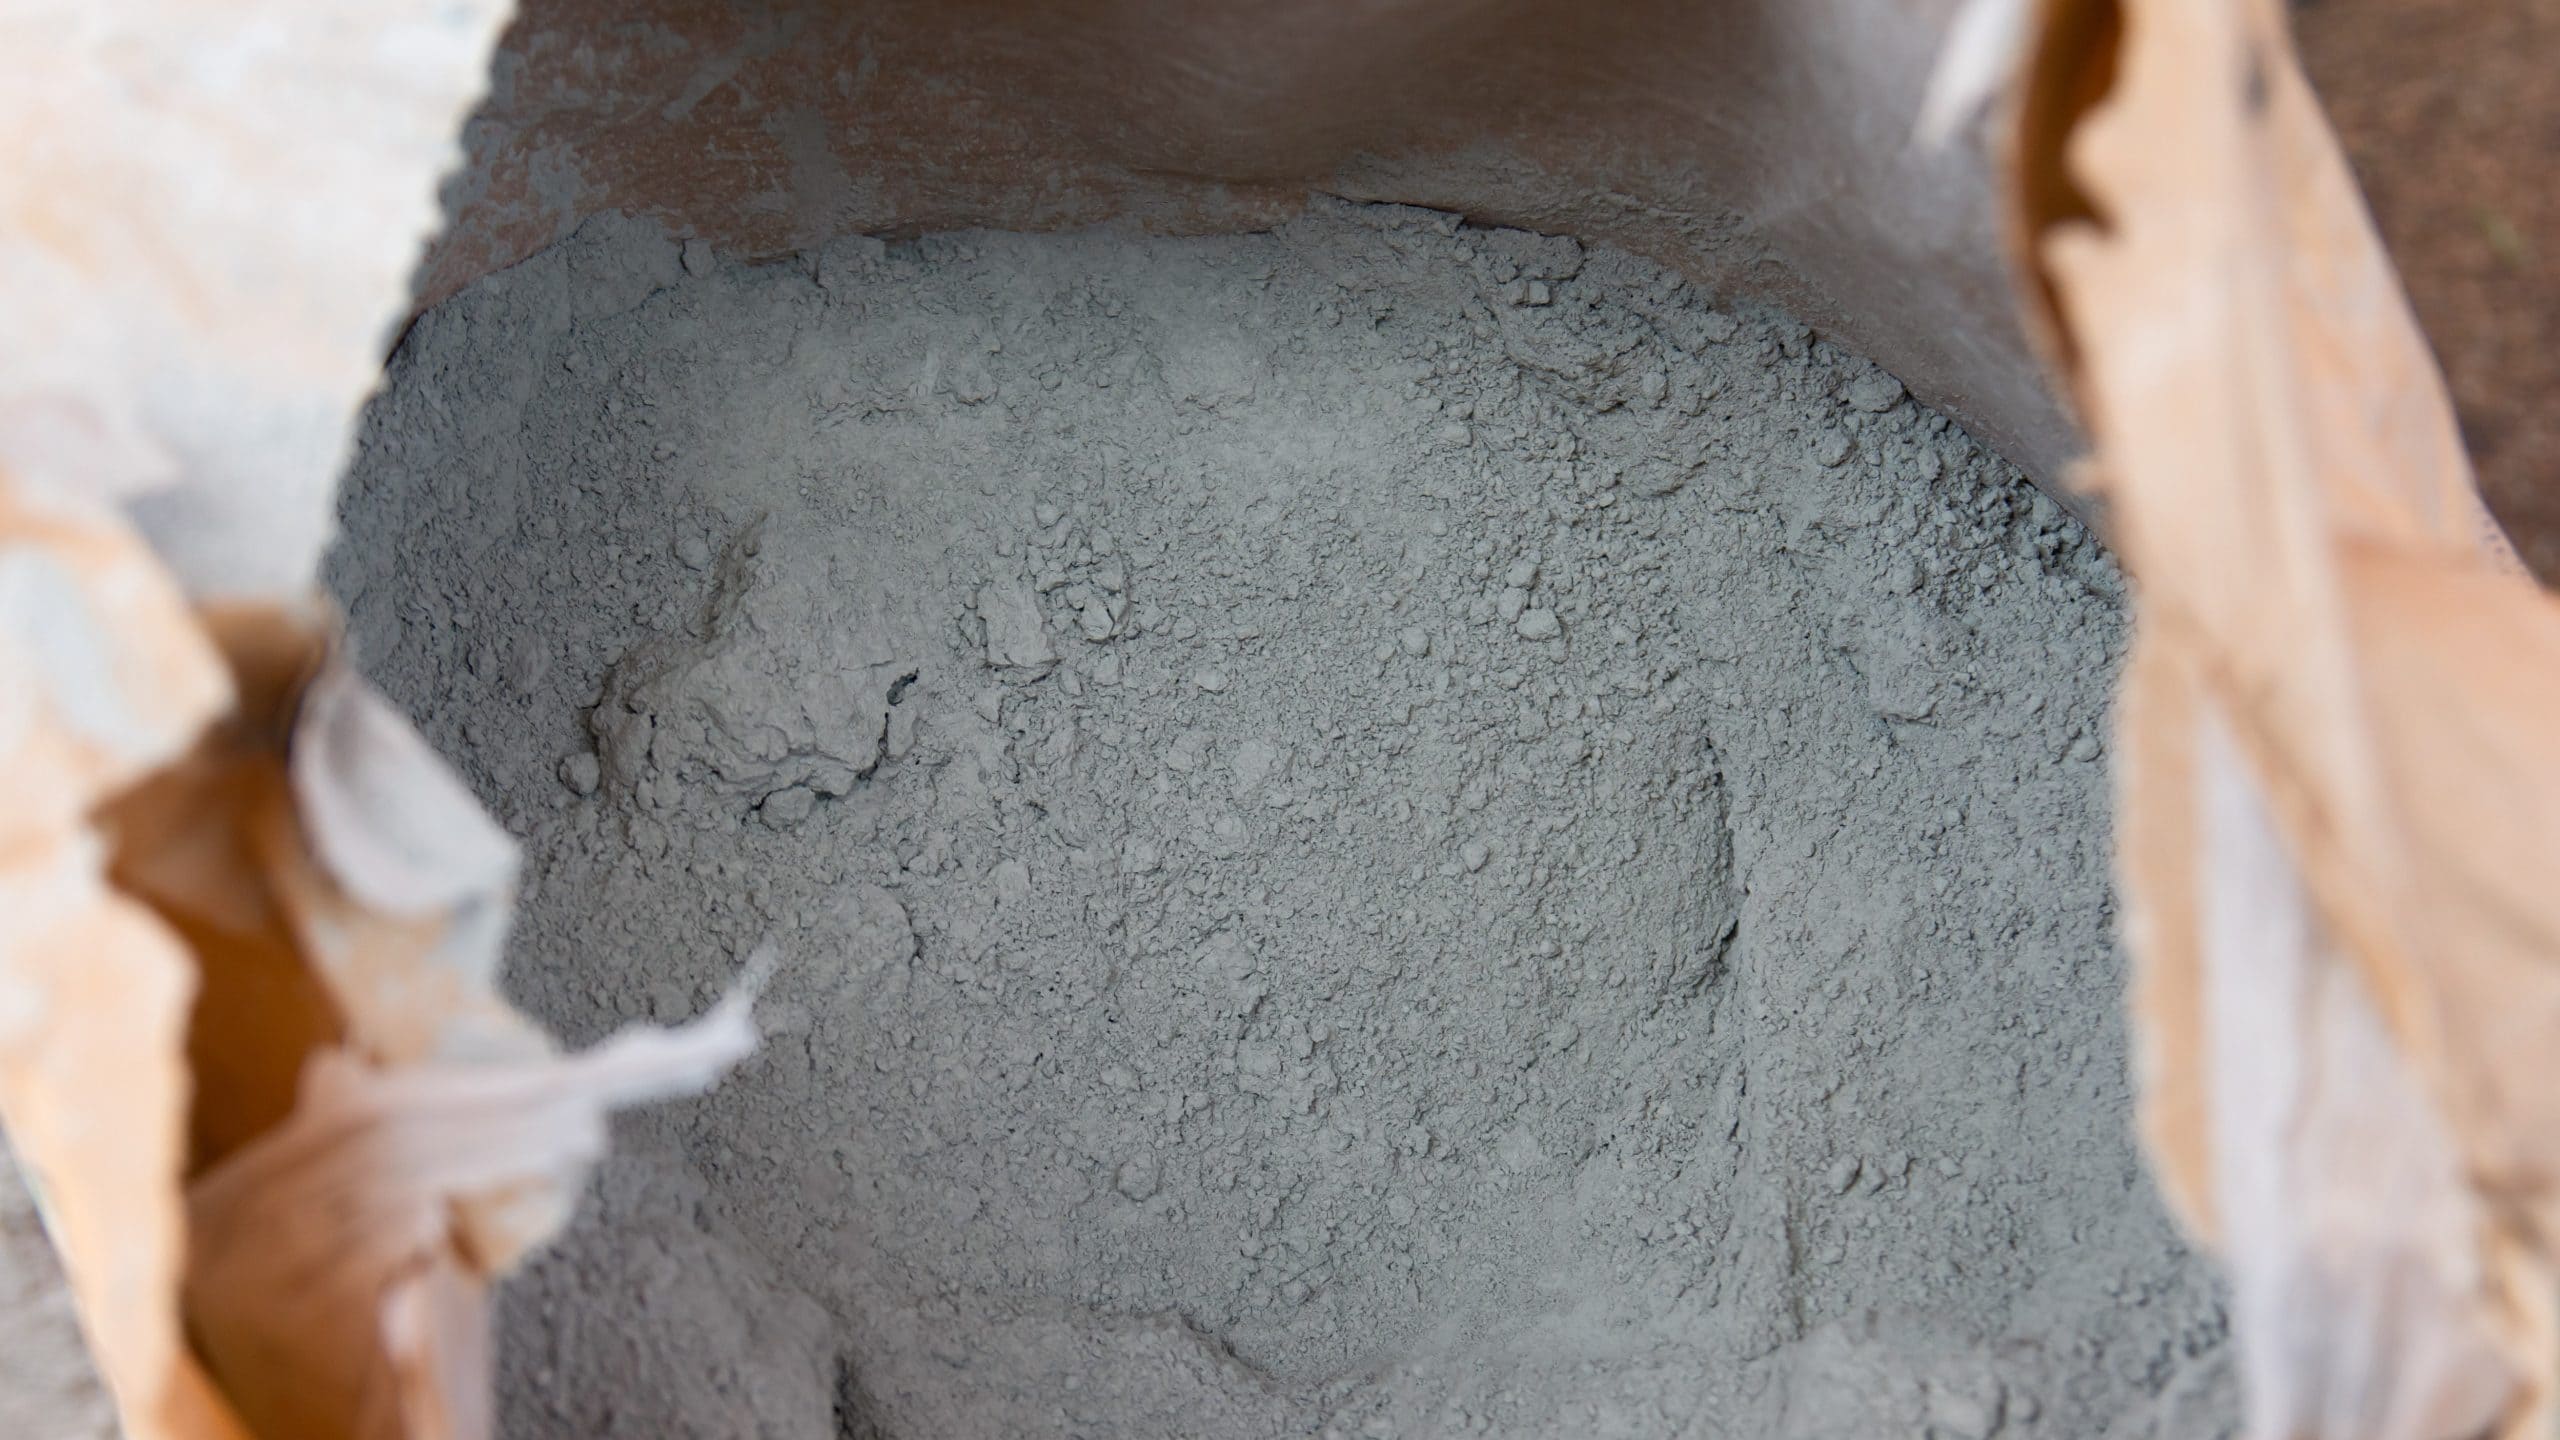 Researchers Scale-up Emission-free Cement Trials